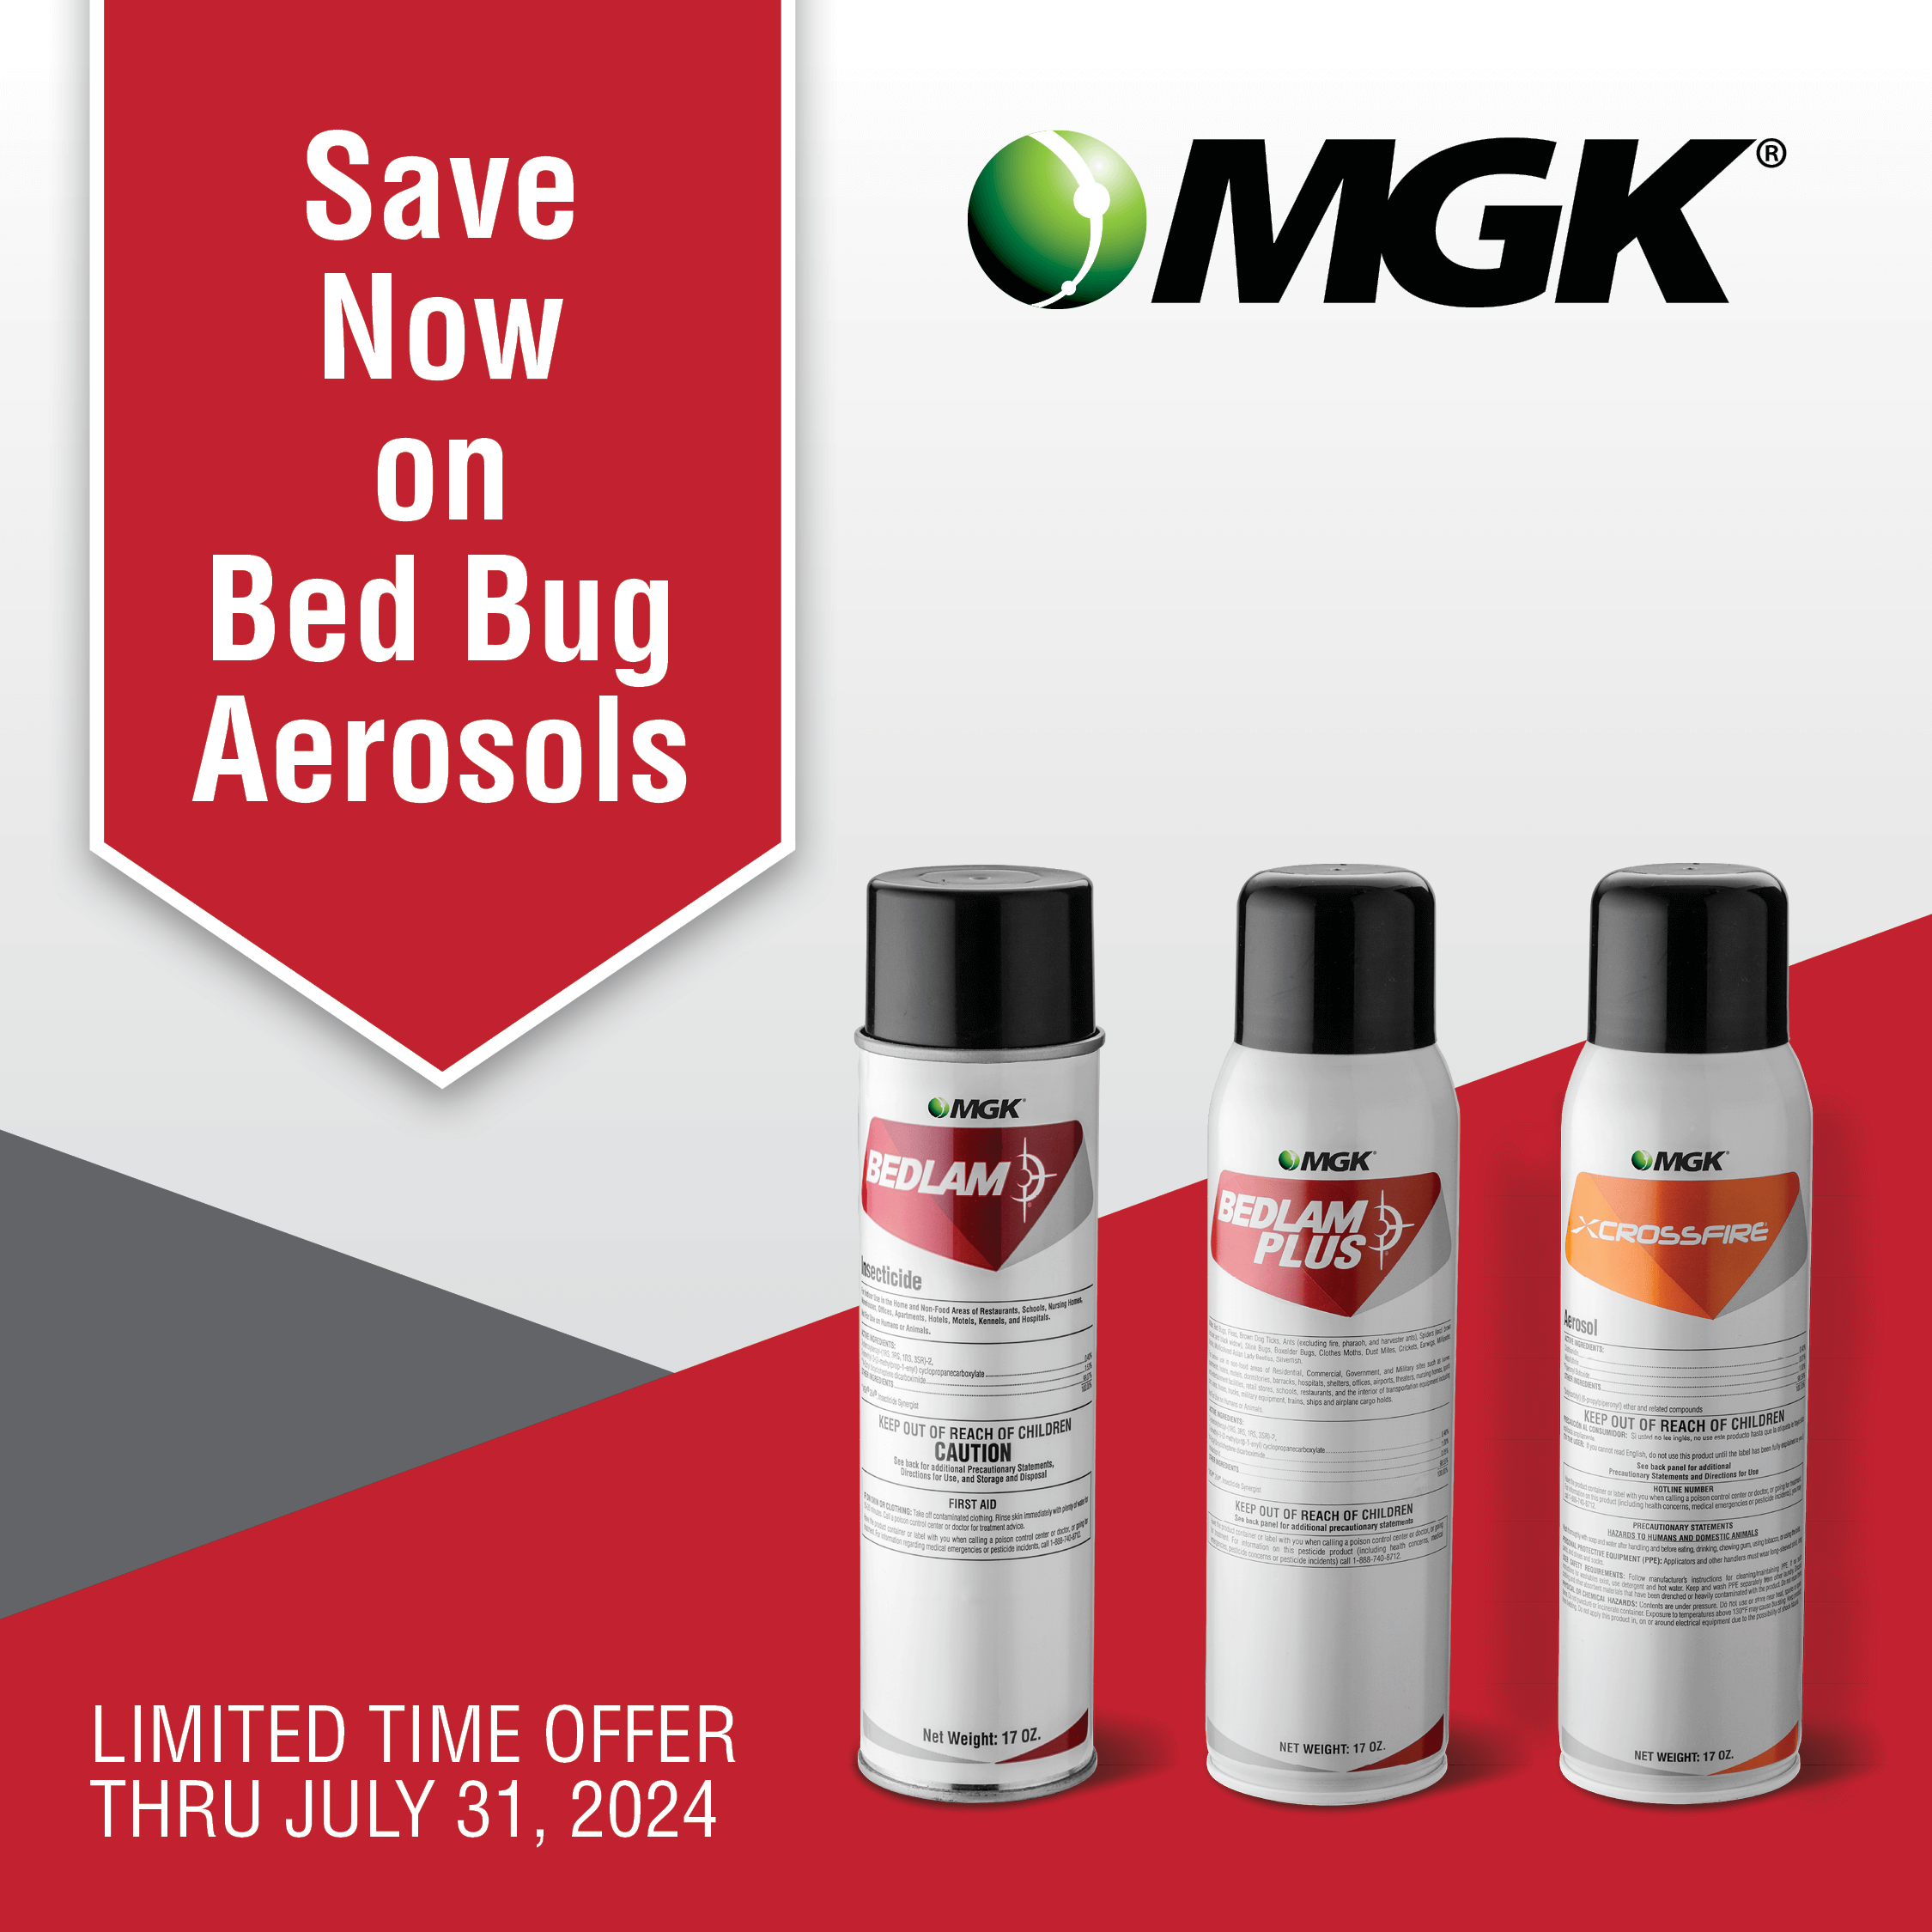 Save now on bed bug aerosols. Save now. Limited time offer through july 31, 2024